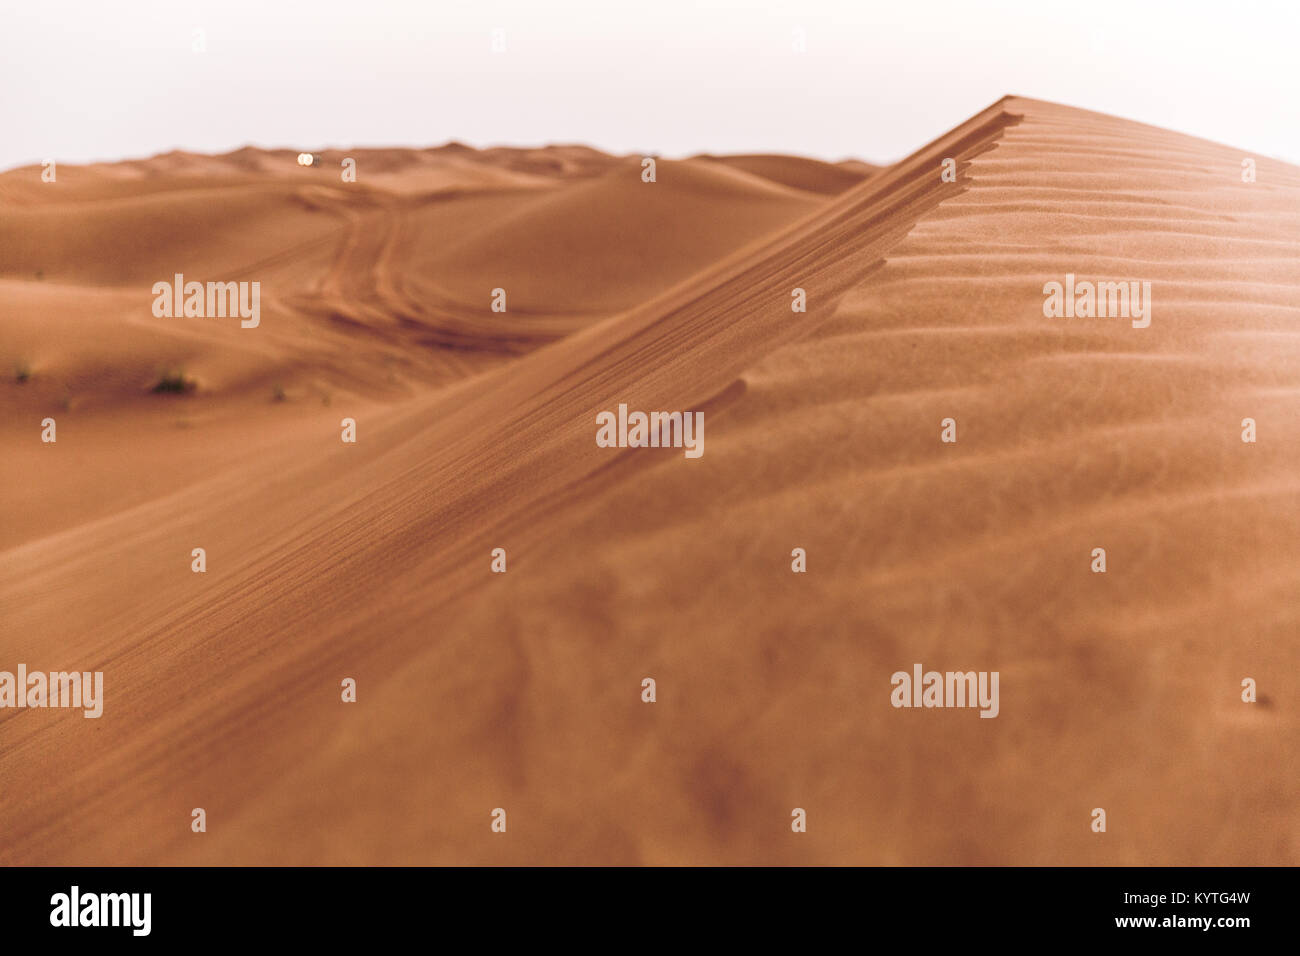 Dune bashing adventure at Dubai desert on Oman road. Natural textures, abstract pattern, wind blowing. Planet earth, mother nature. Fine Sand. Stock Photo